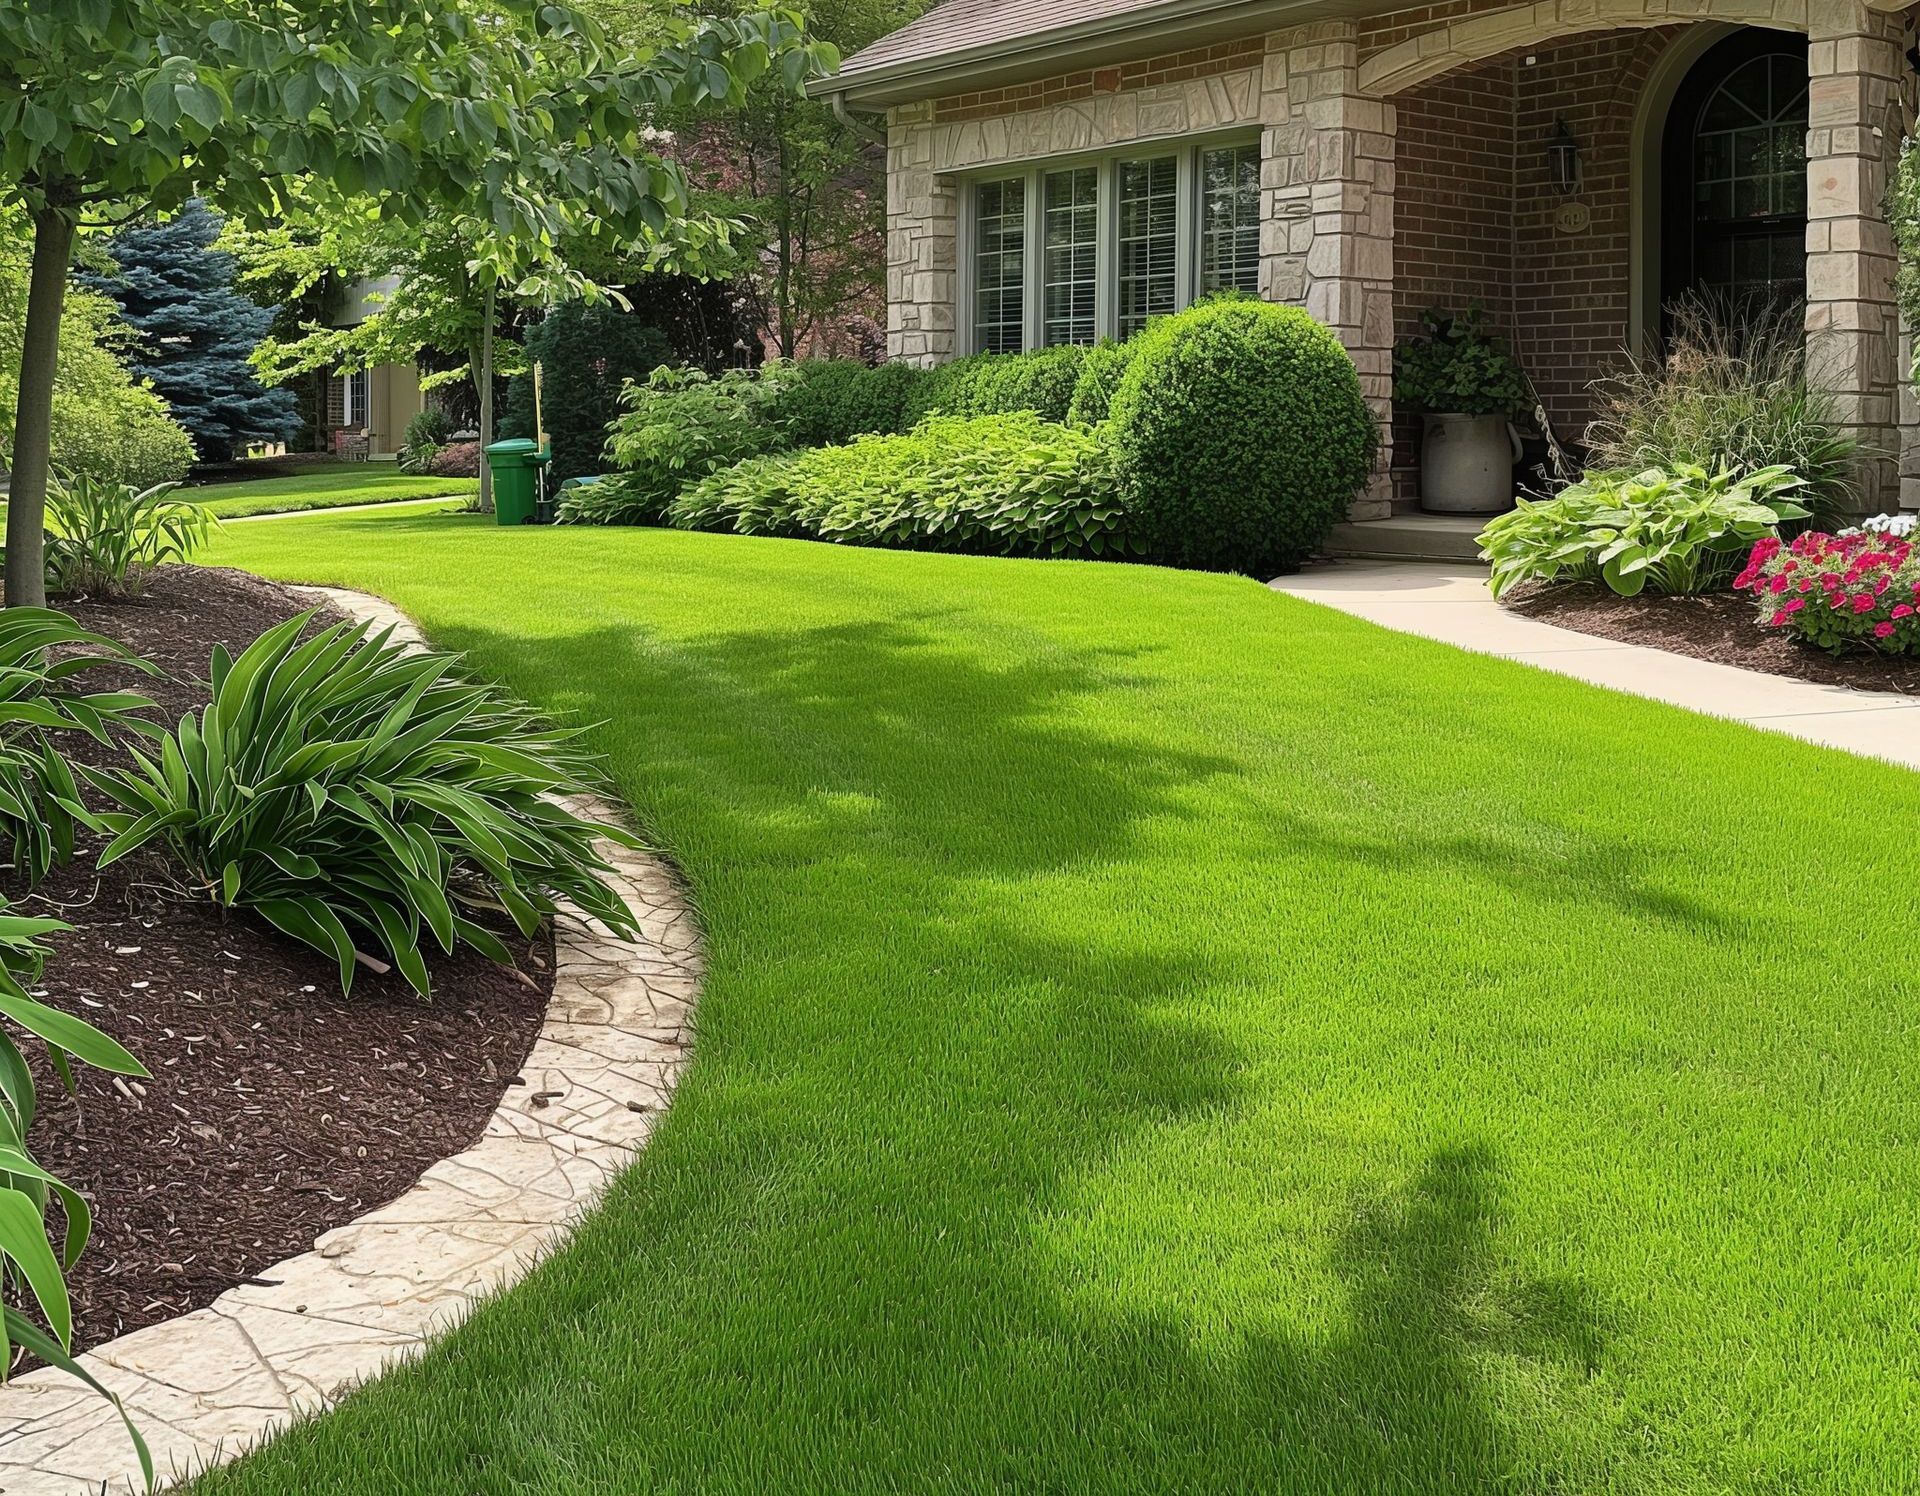 Watering Your Lawn: Best Tips for For Healthy Lawn Care